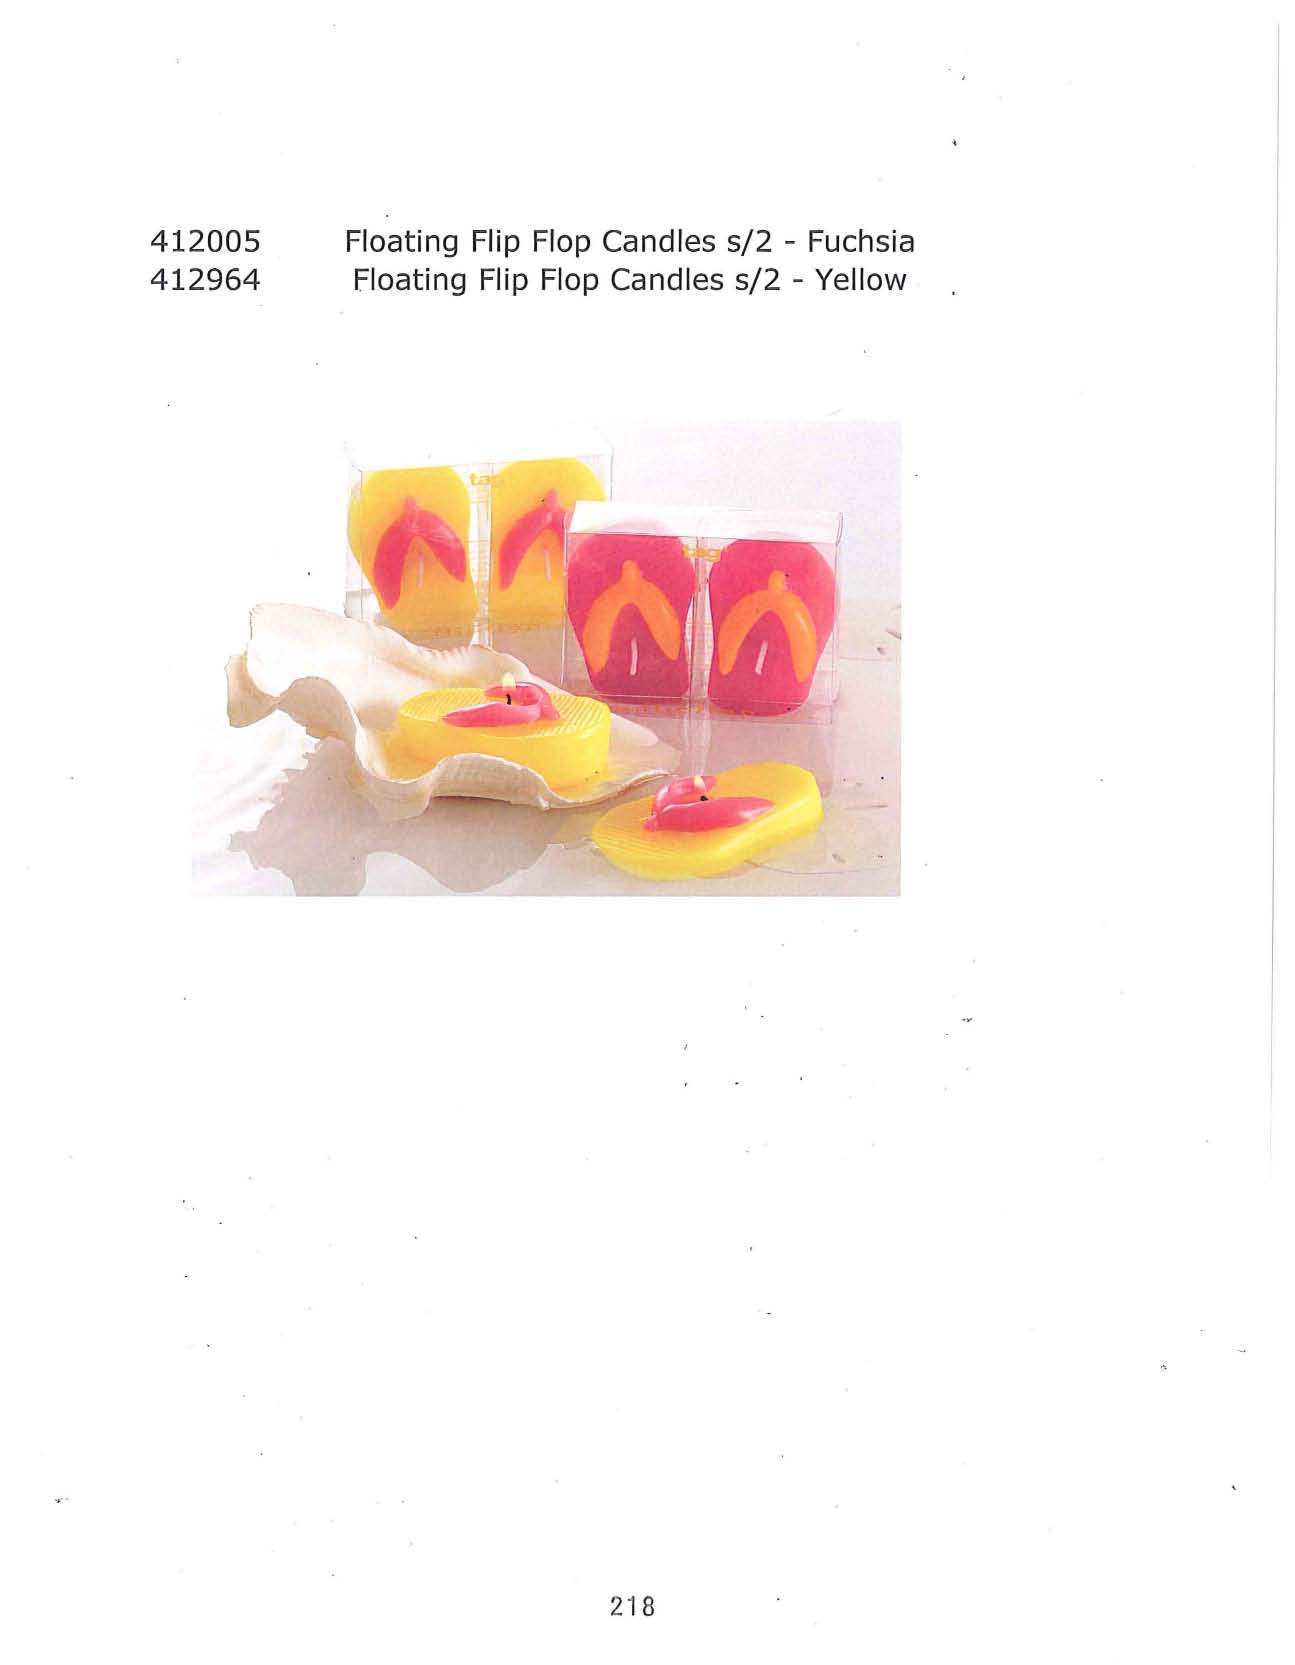 Floating Flip Flop Candle s/2 - Fuchsia and Yellow